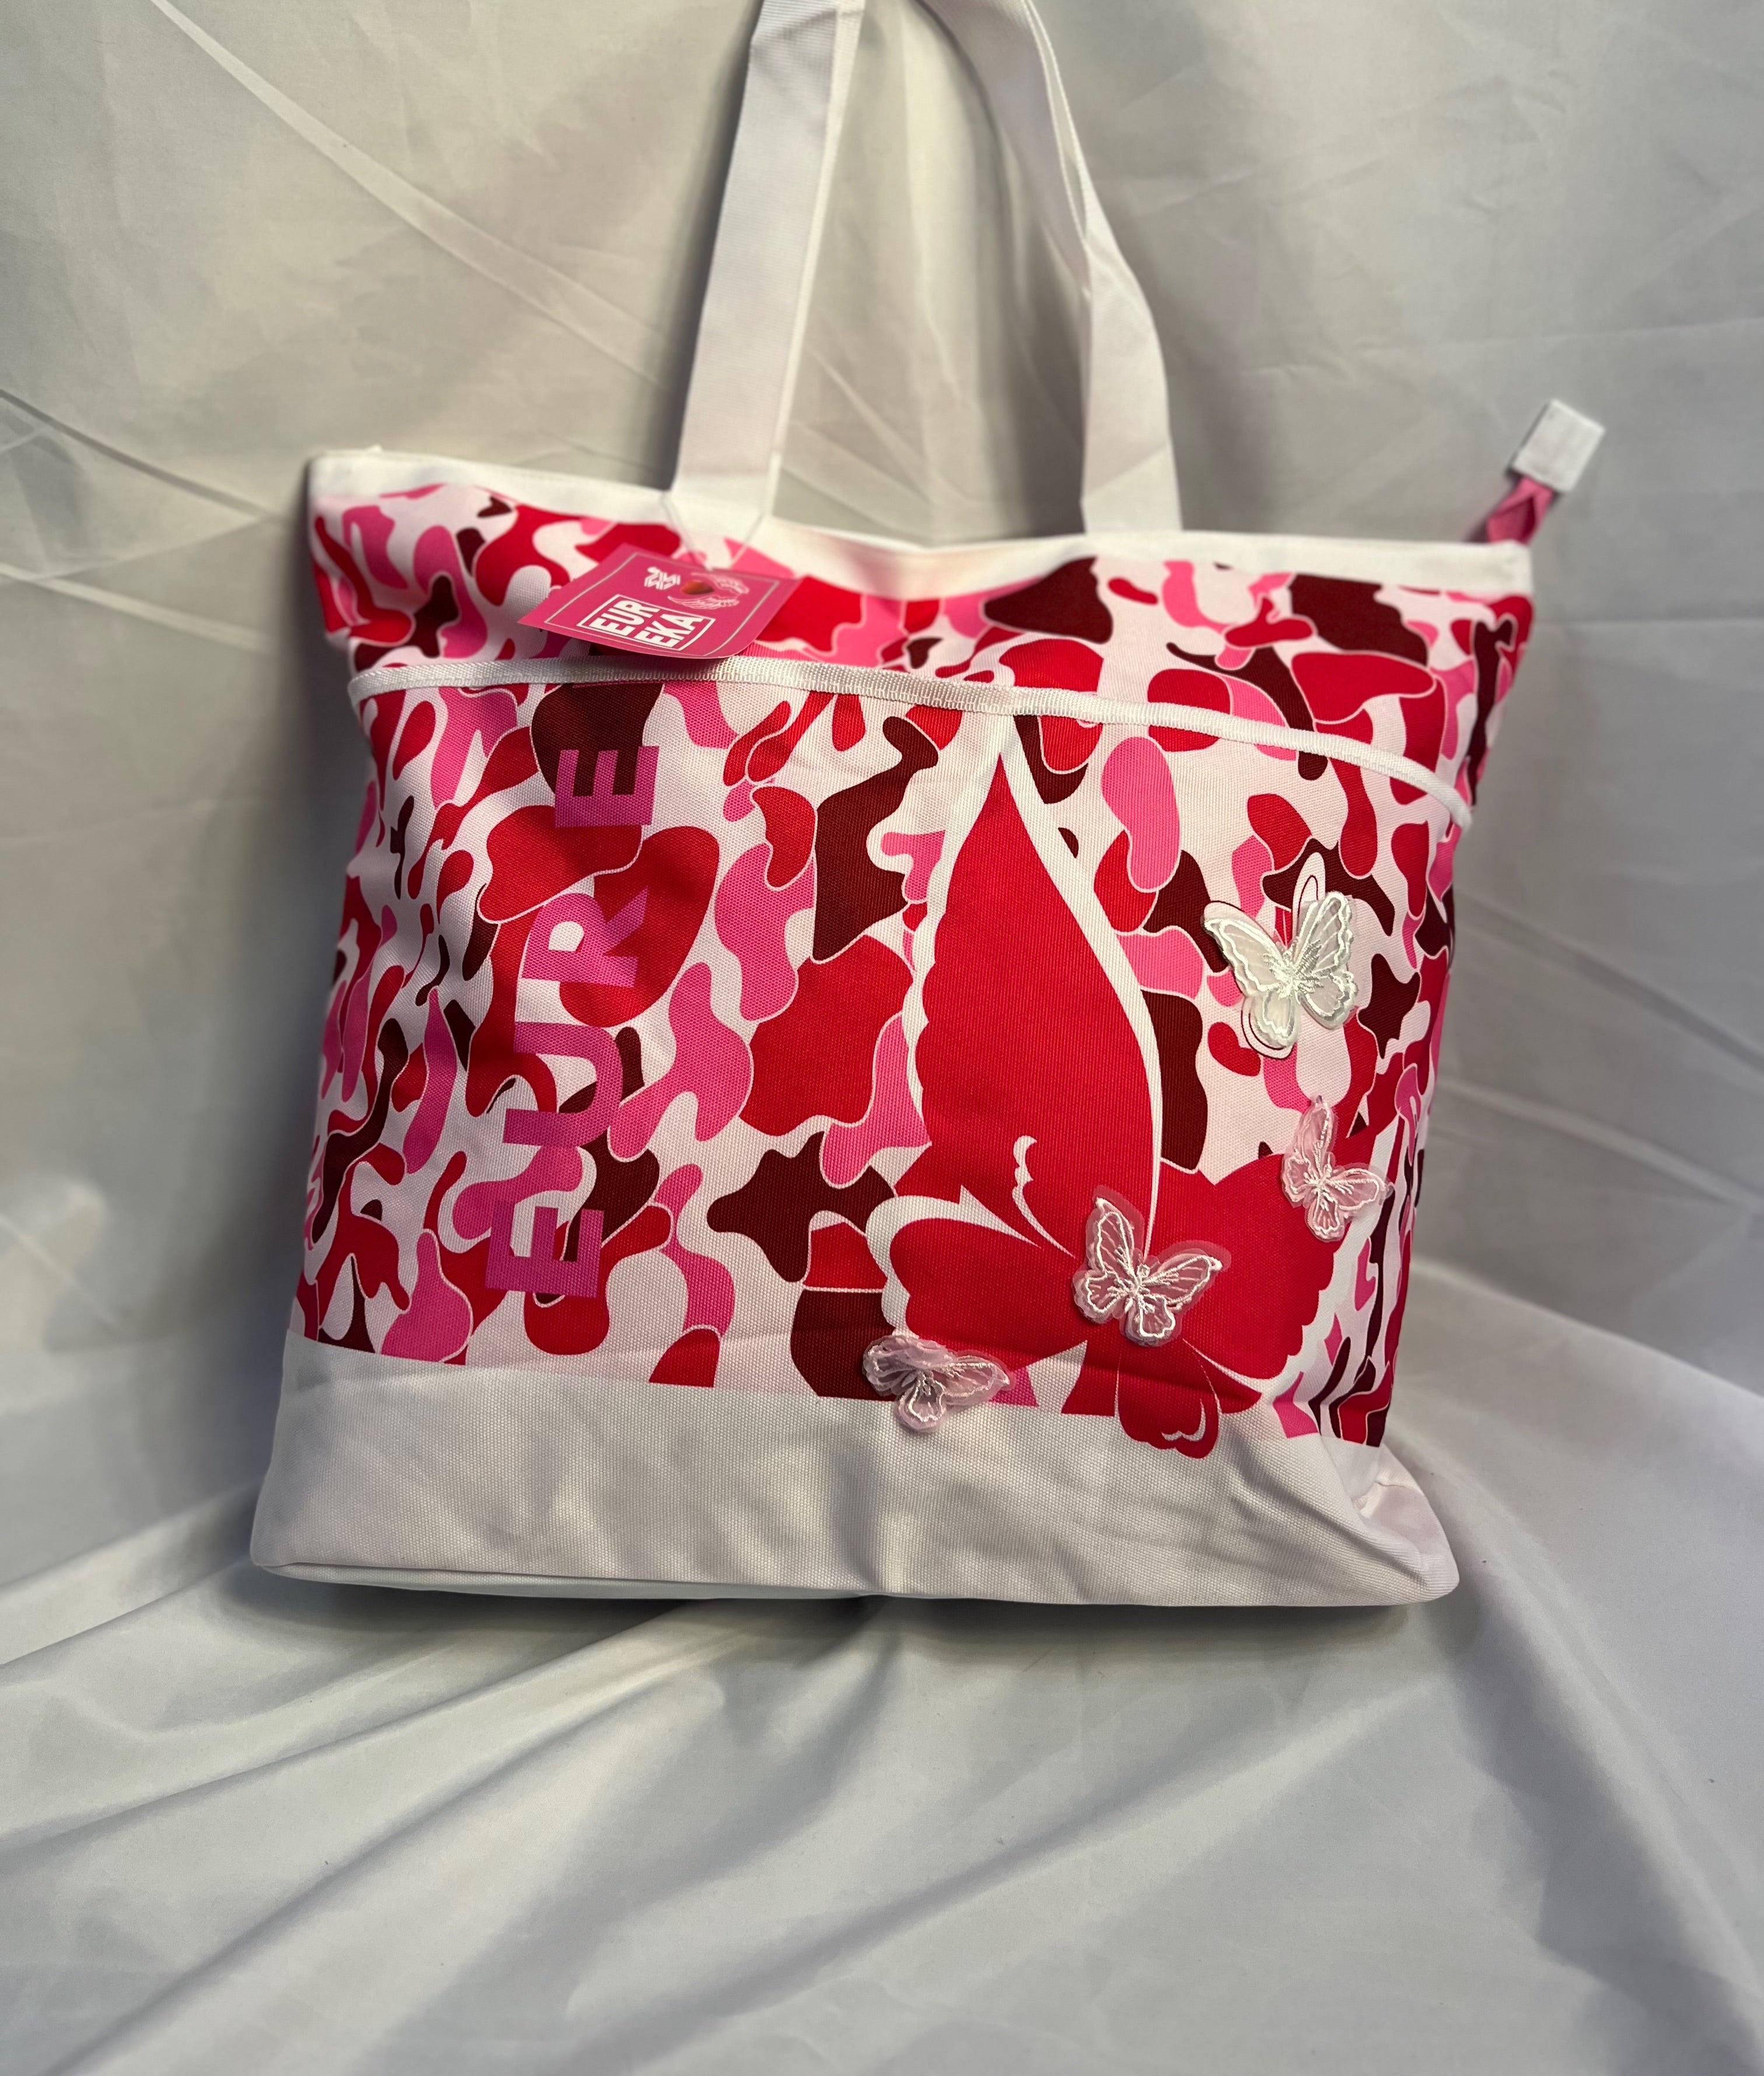 Large Tote Bag Breast Cancer Awareness Created Out of 50 Slang Terms for  Breasts 